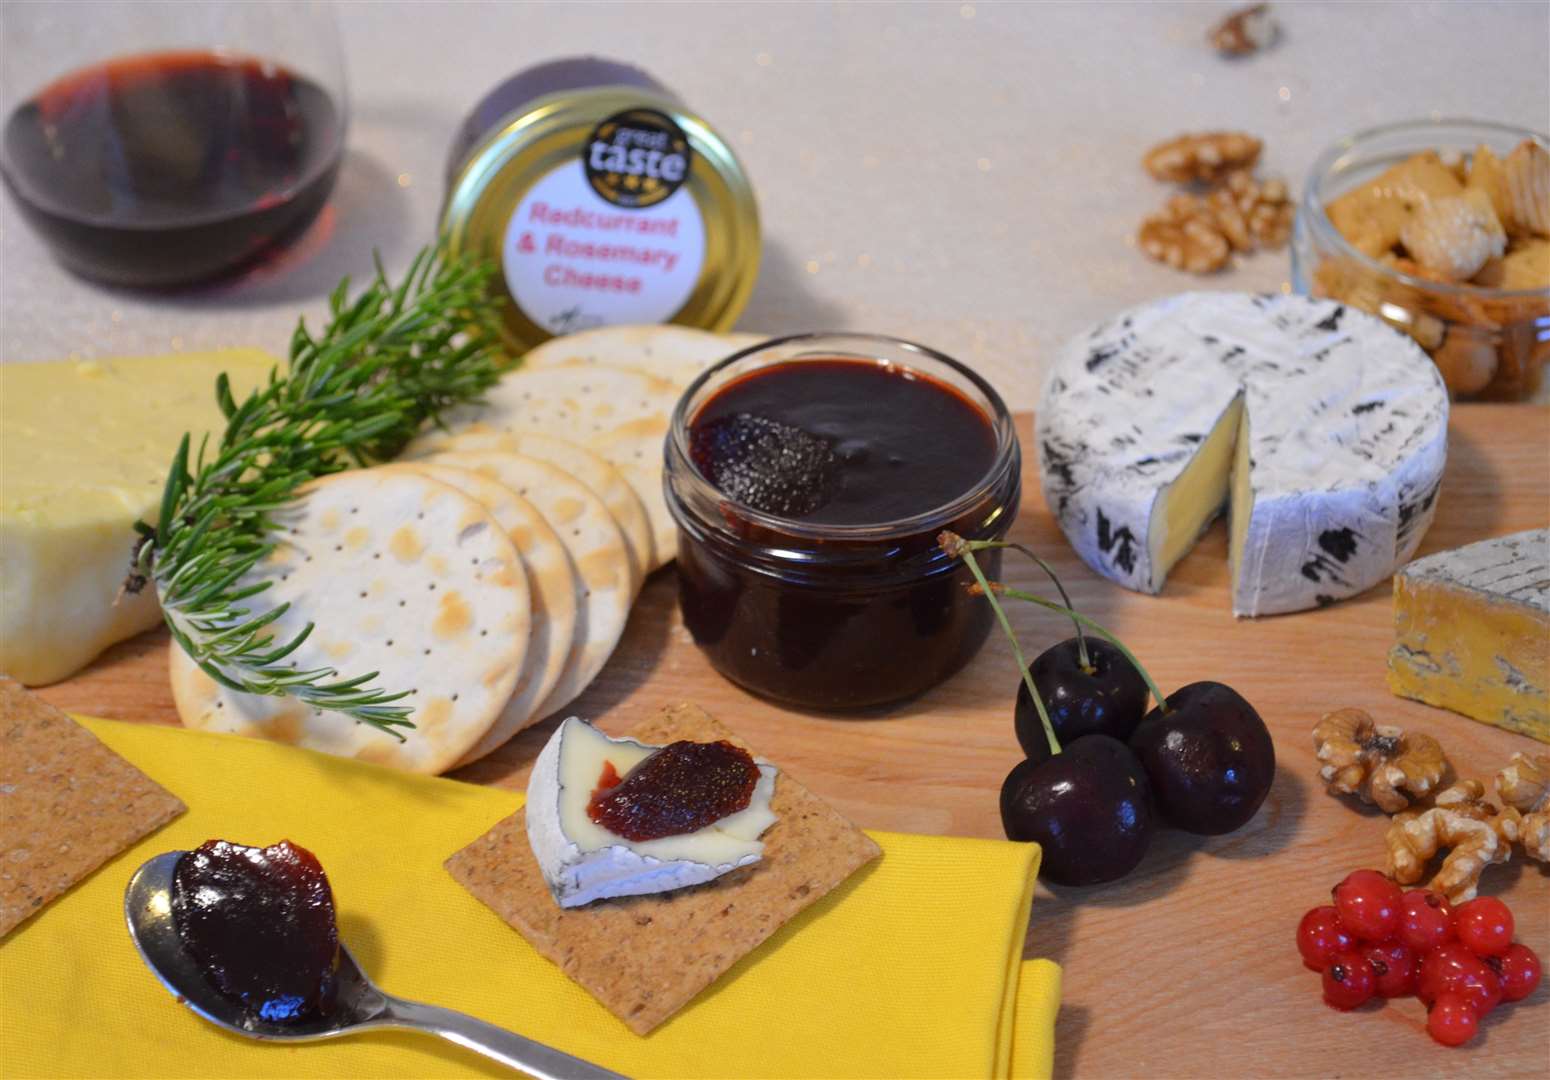 Mearns Marmalade were awarded three Great Taste stars for their redcurrant and rosemary cheese.